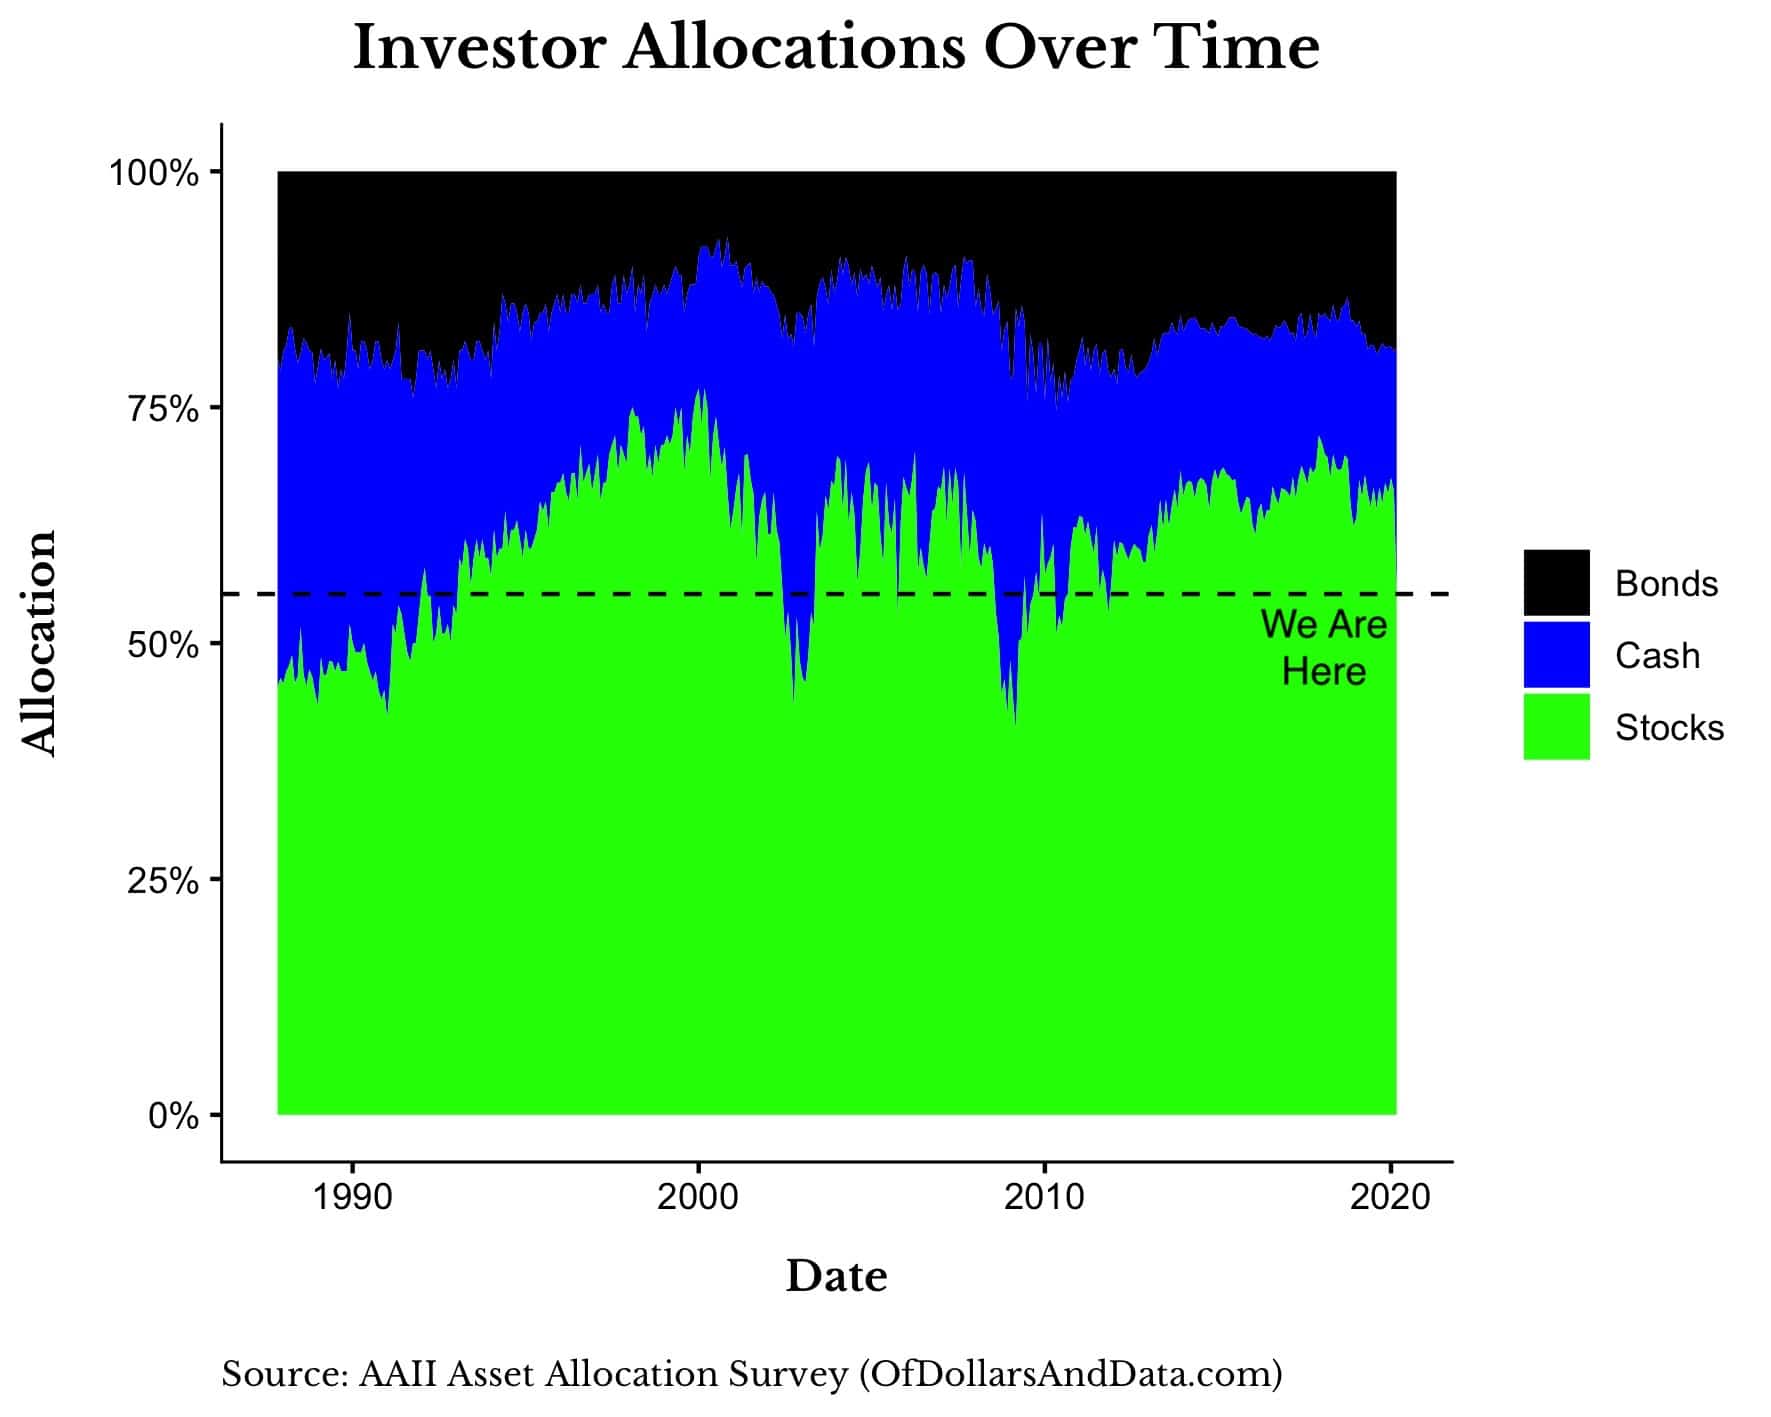 Investor allocations to stocks, bonds, and cash over time with where we are in 2020 highlighted